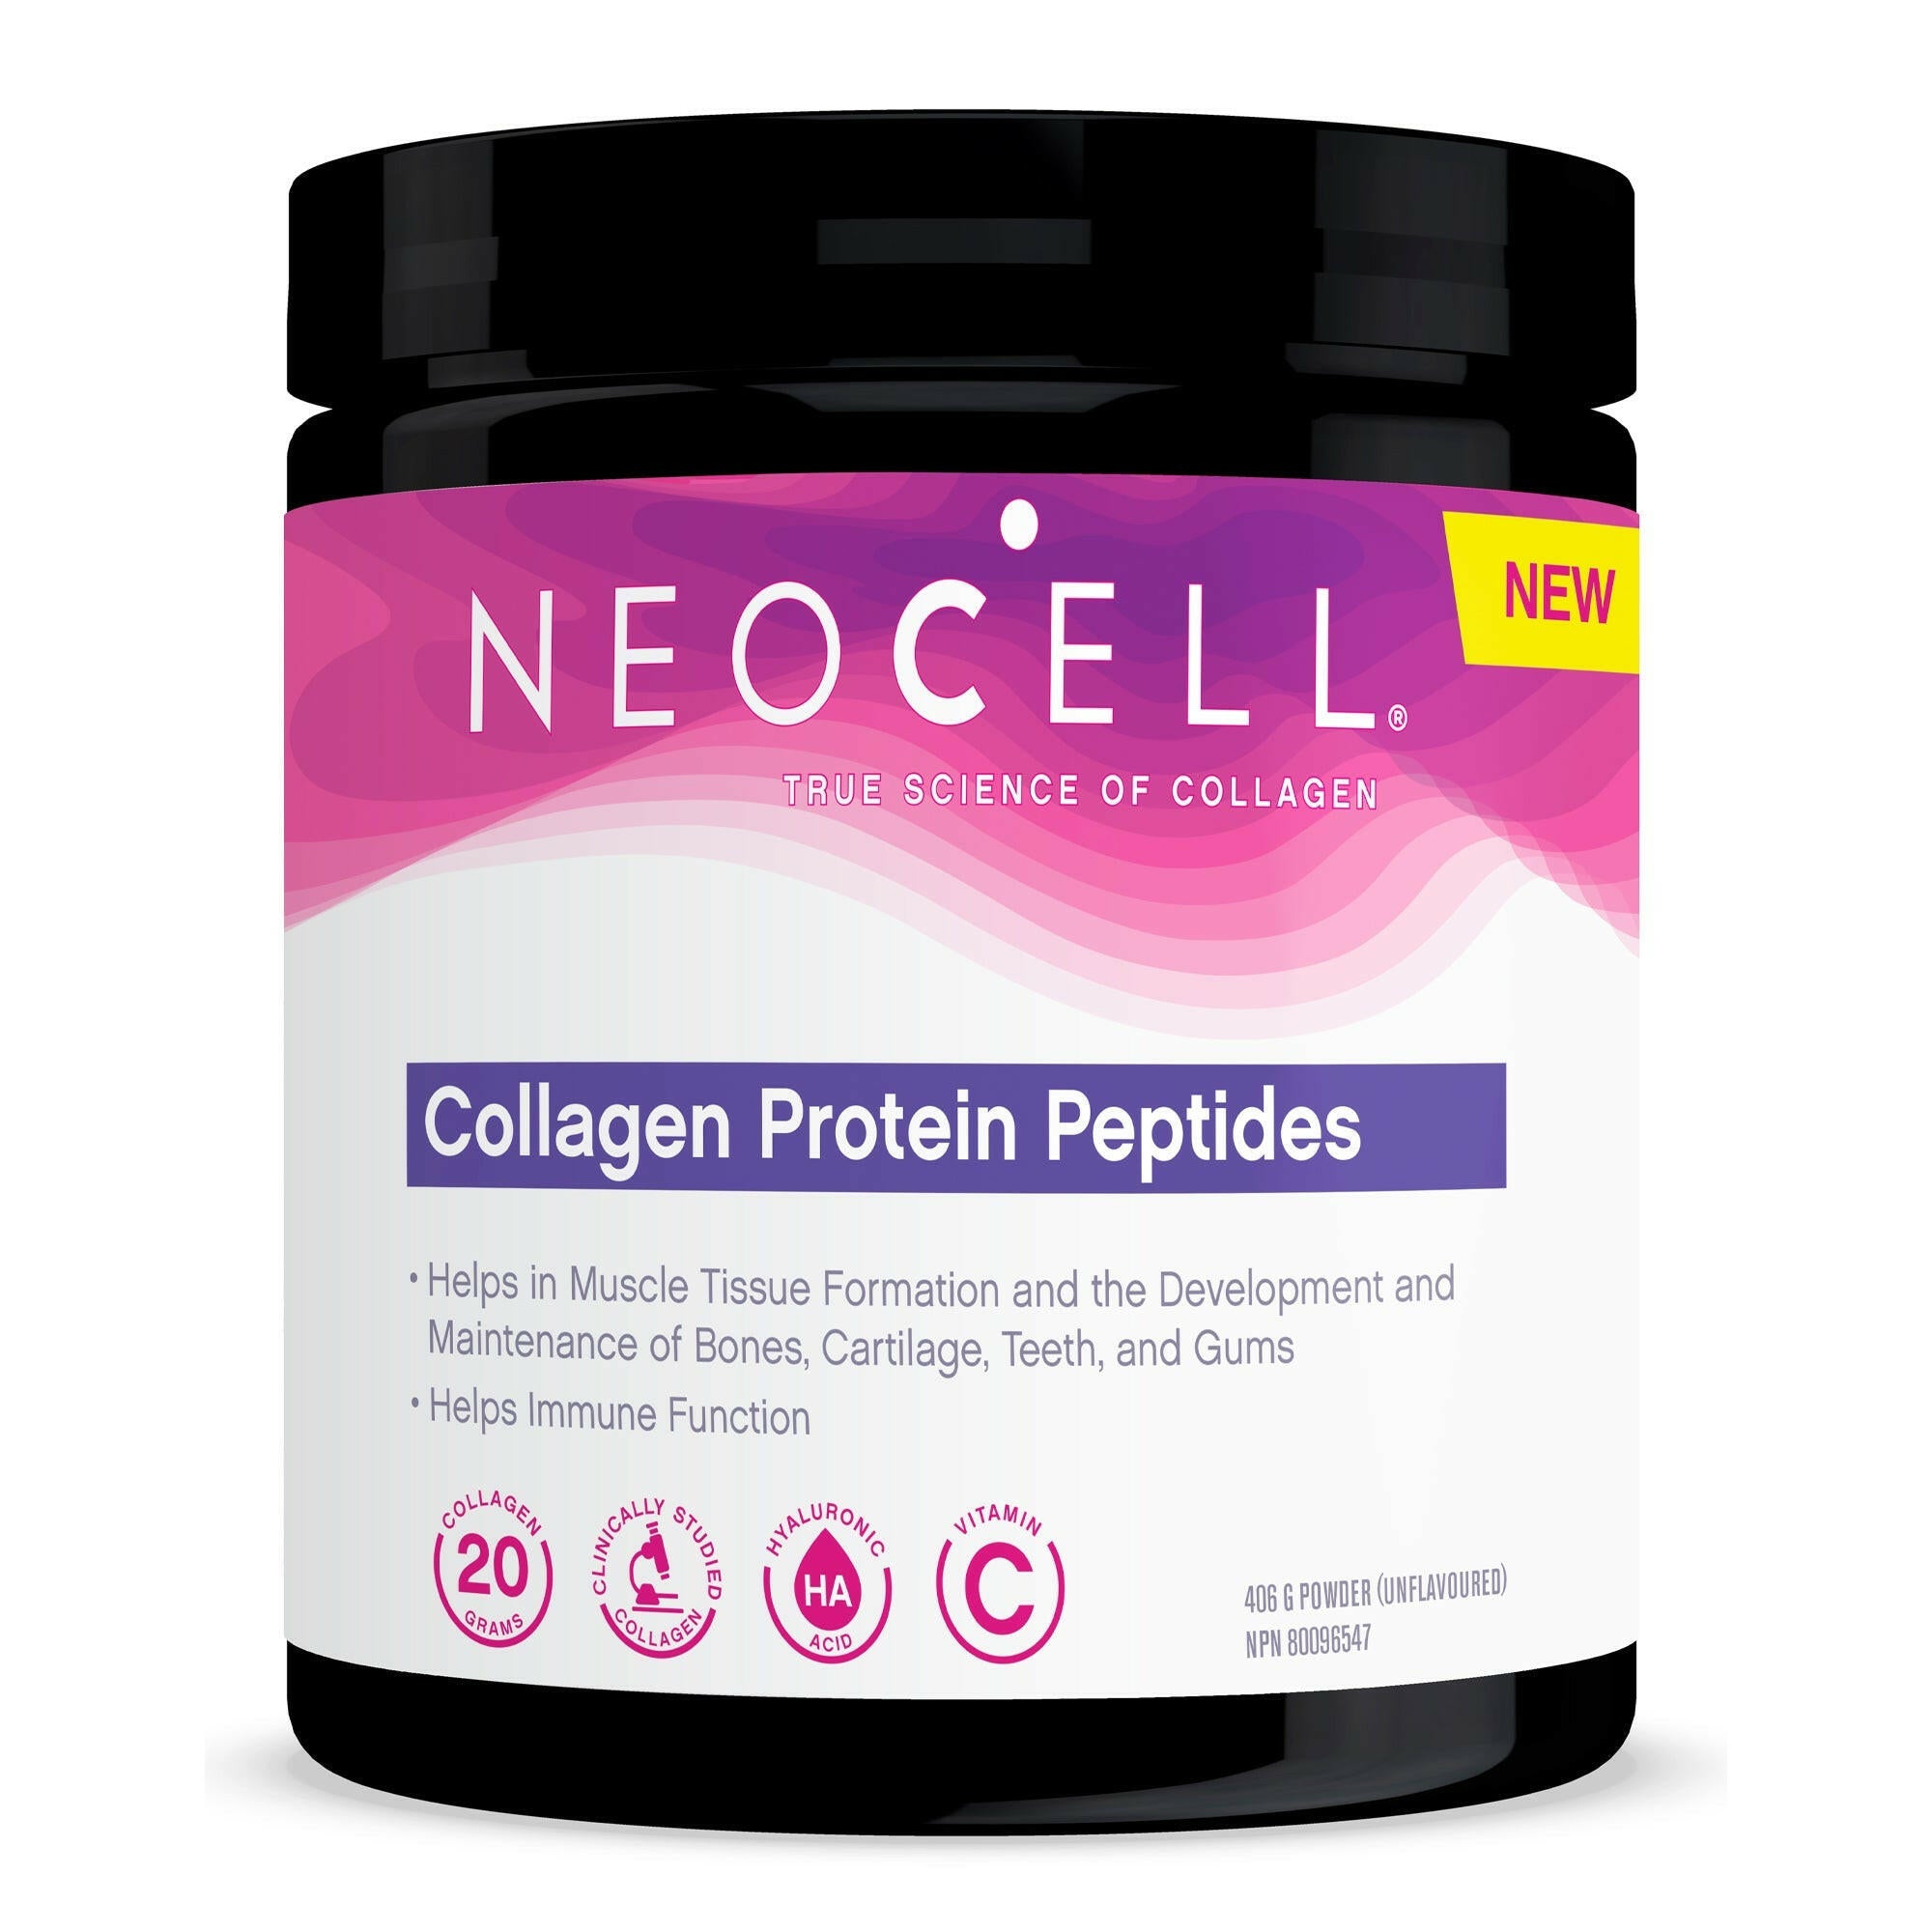 Neocell Collagen Protein Peptides (200g | 400g)